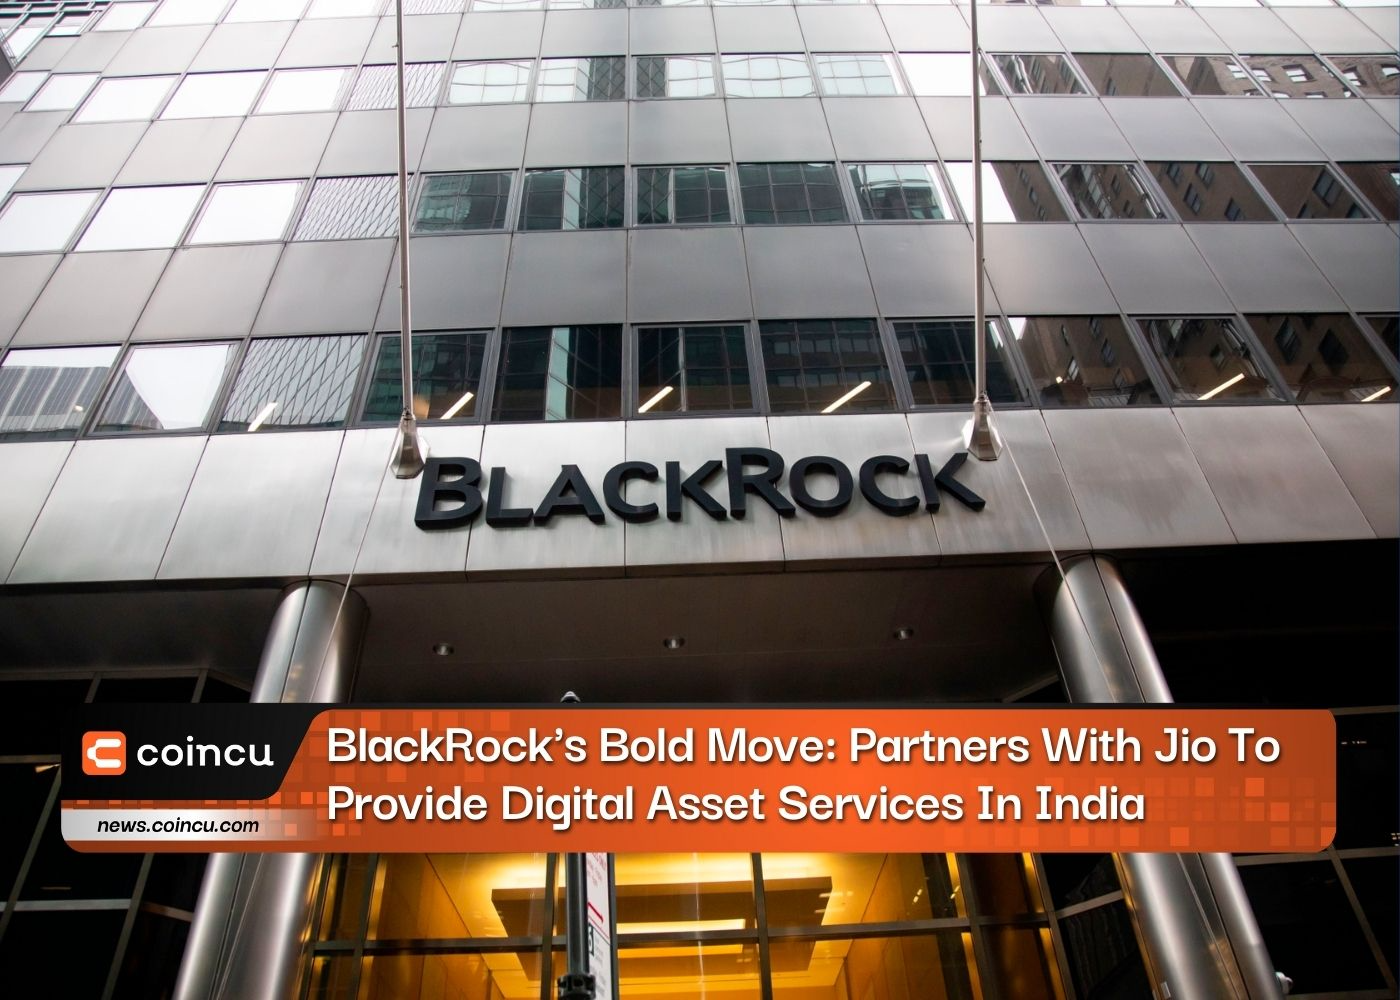 BlackRock’s Bold Move: Partners With Jio To Provide Digital Asset Services In India